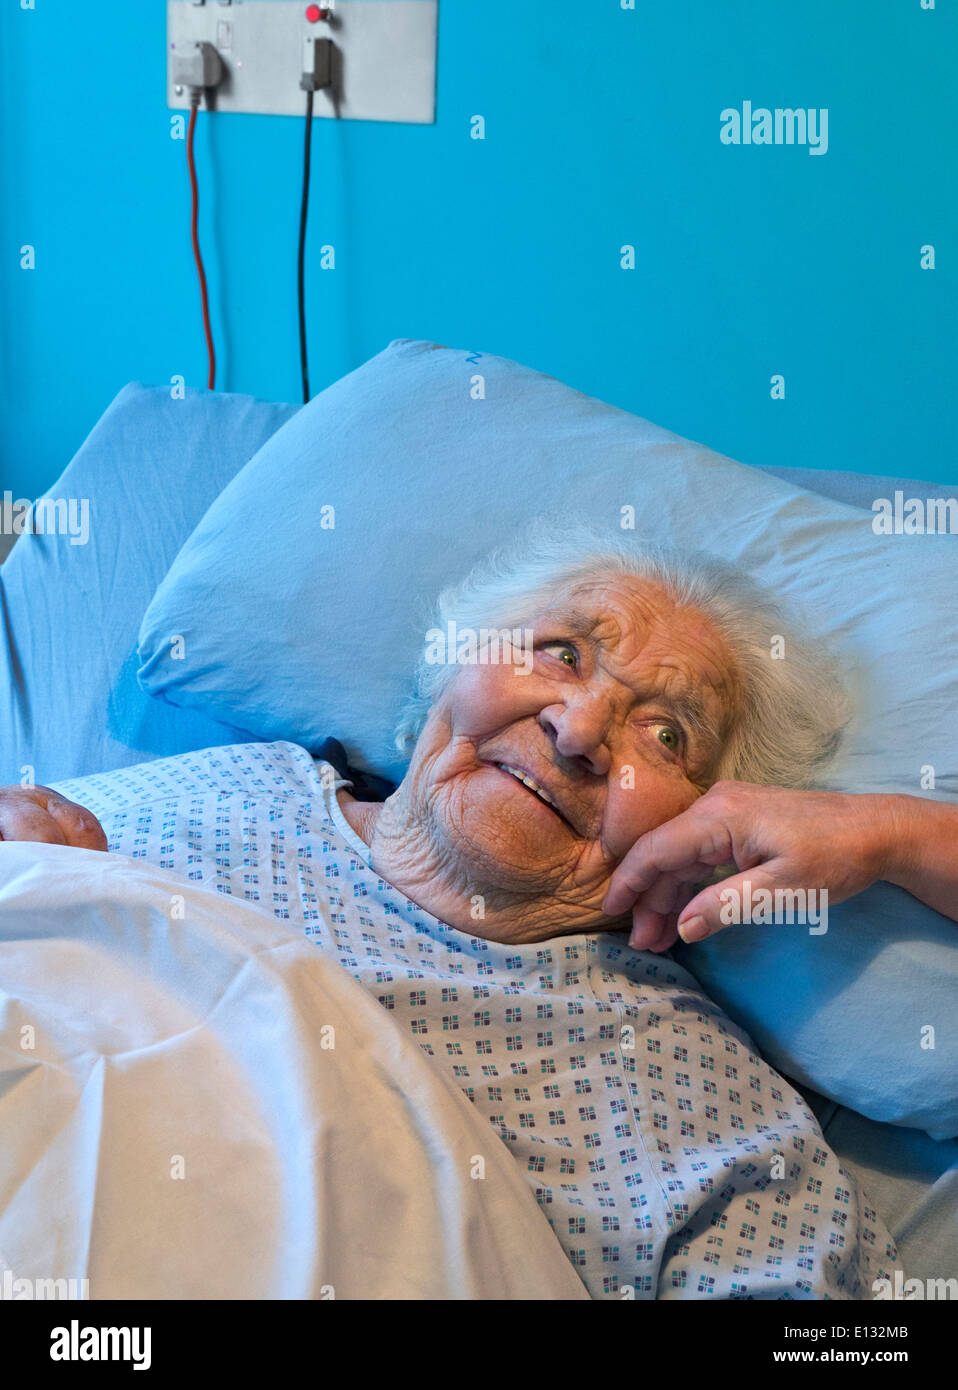 ELDERLY LADY CARE BED SMILING TOUCHING Contented smiling senior old age alert elderly lady secure in care bed with comforting hand of carer nurse Stock Photo